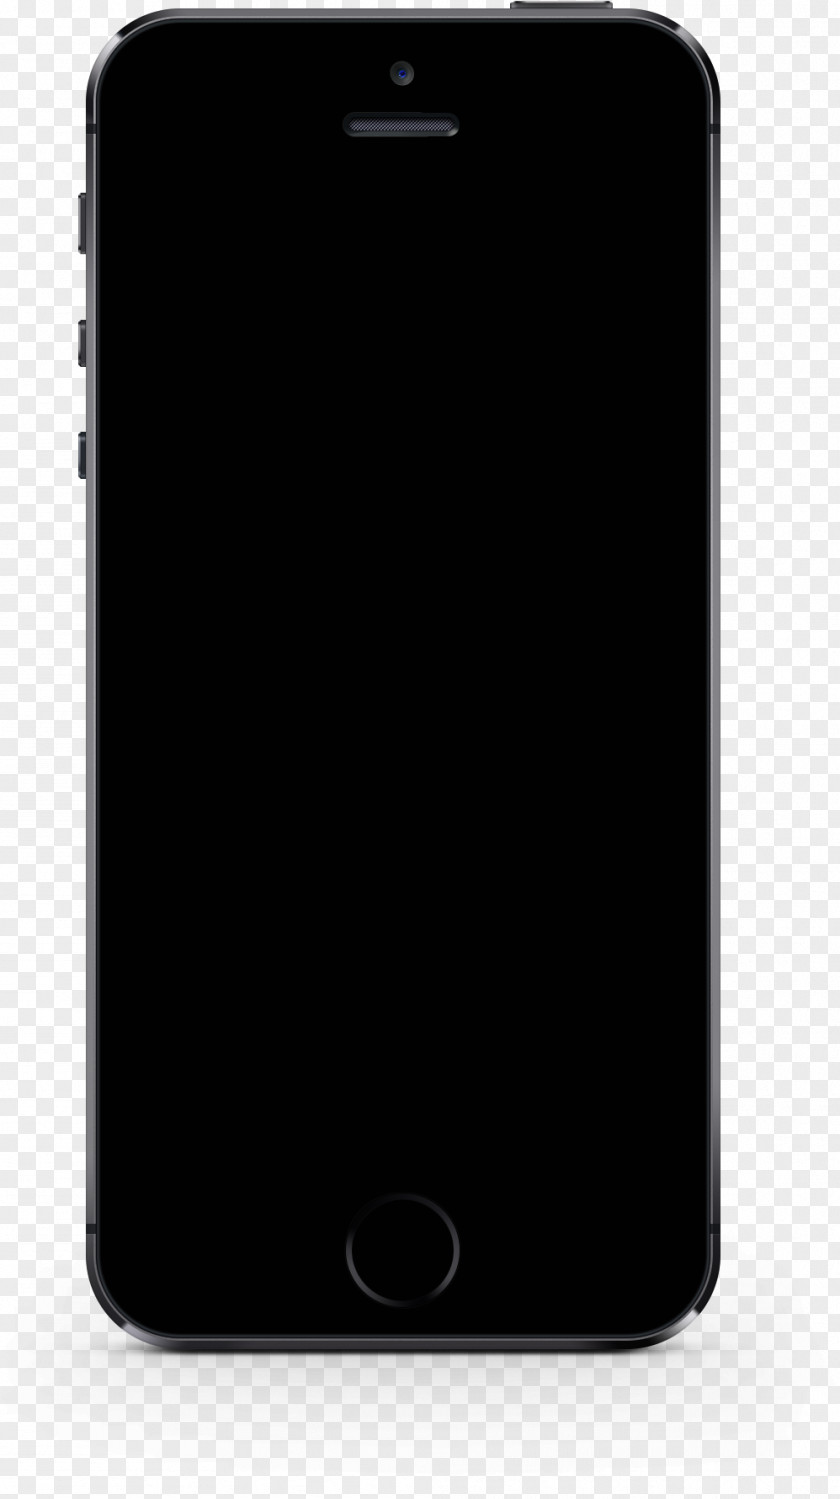 Smart Phone Feature Smartphone IPhone 6 Plus Telephone PNG